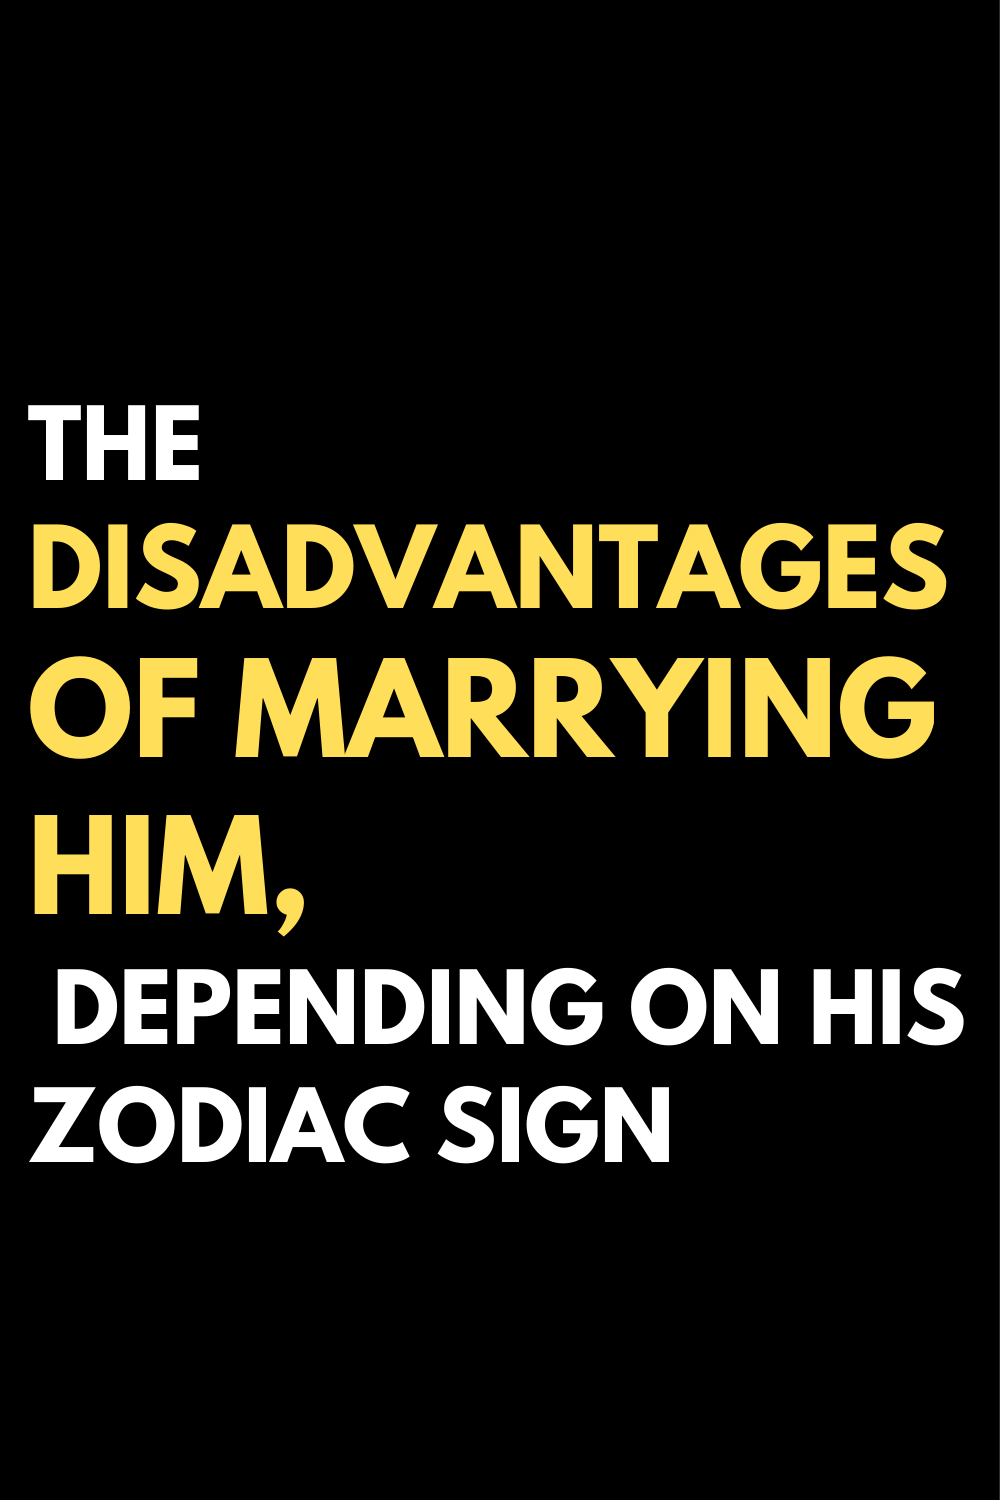 The disadvantages of marrying him, depending on his zodiac sign